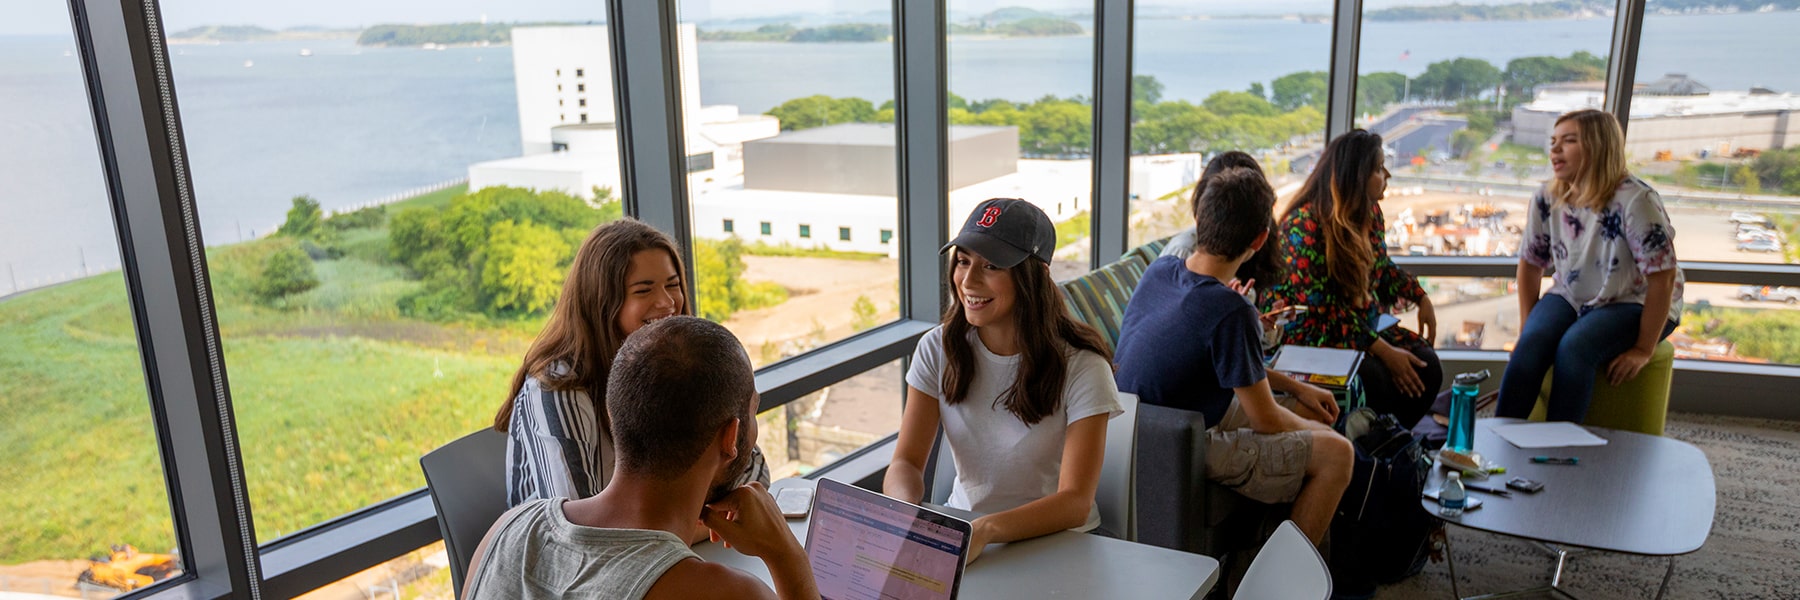 Students in Residence Hall Lounge with view of the water.